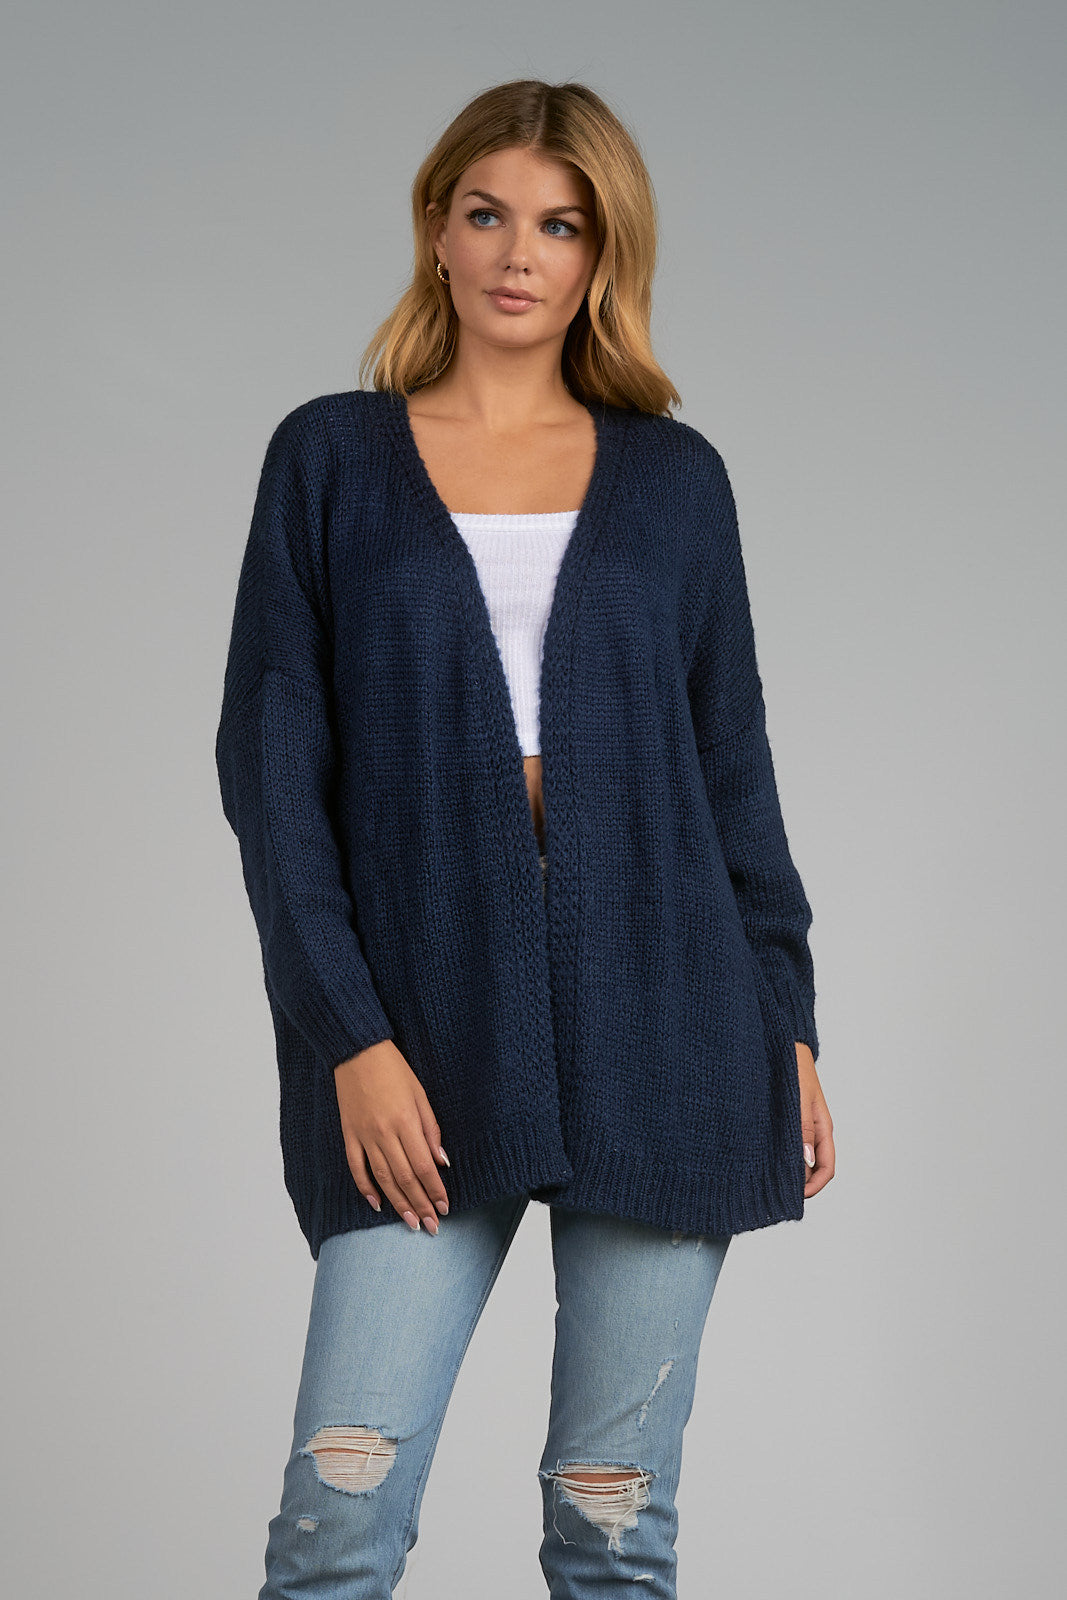 MADAME Peach Cashmere Solid Cardigan | Buy SIZE XL Cardigan Online for |  Glamly